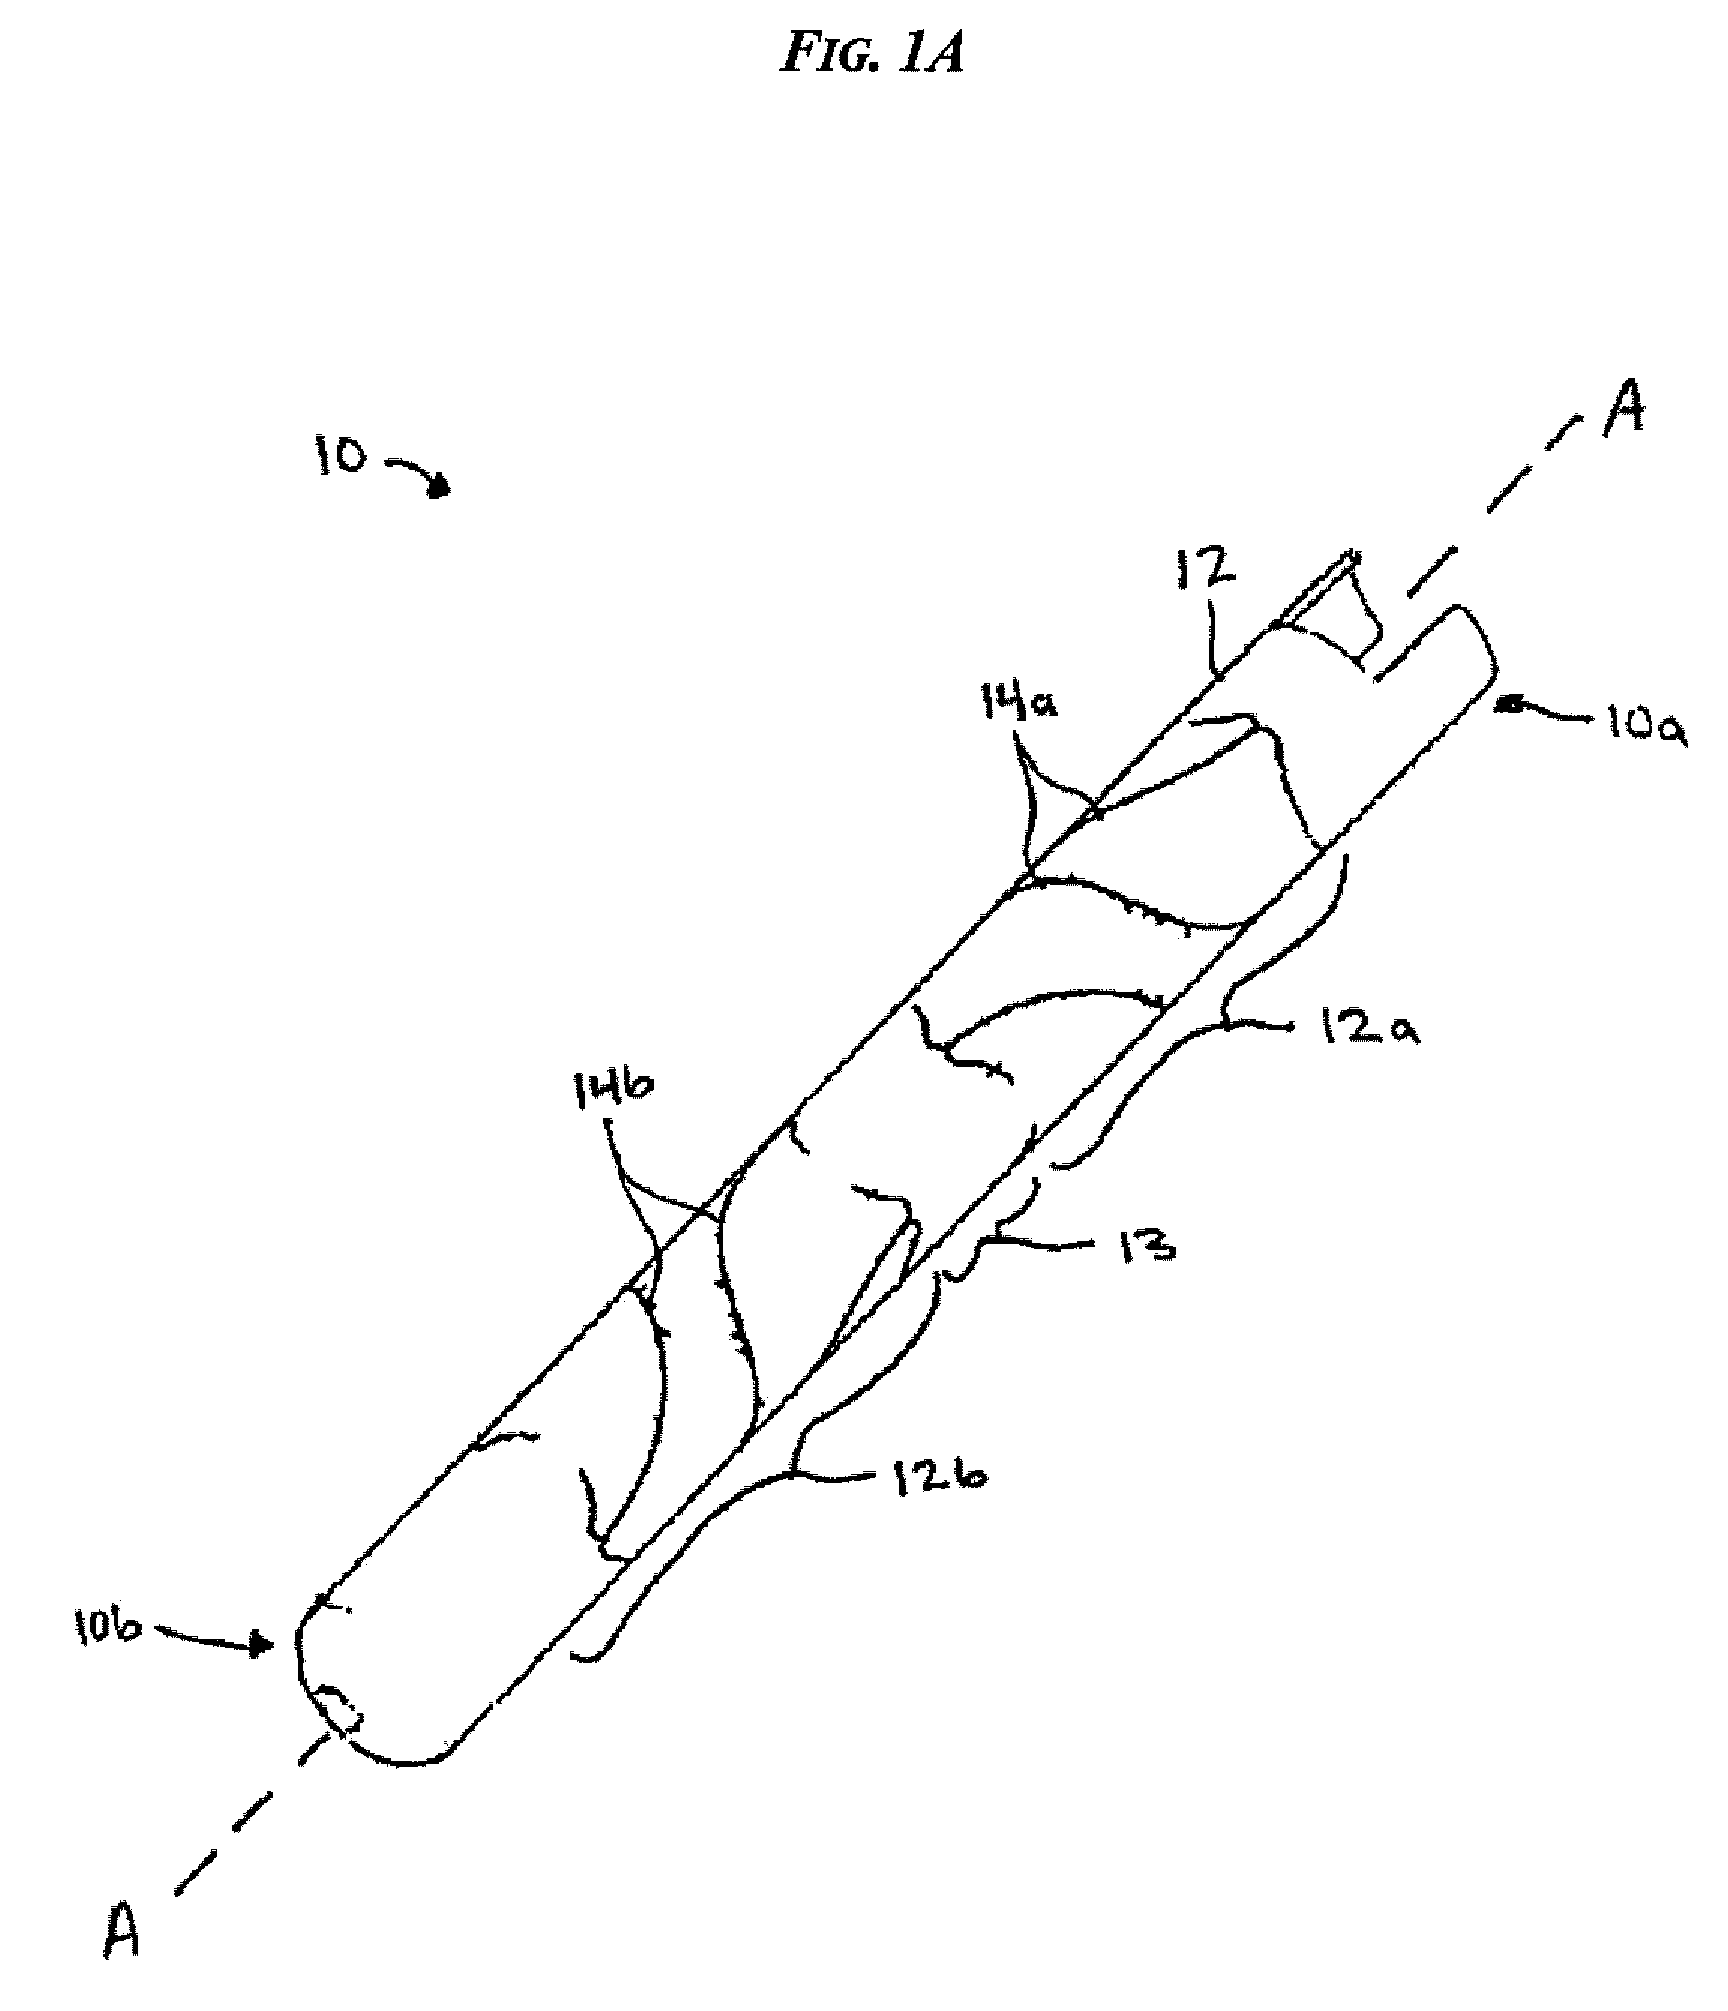 Wound closure devices and methods